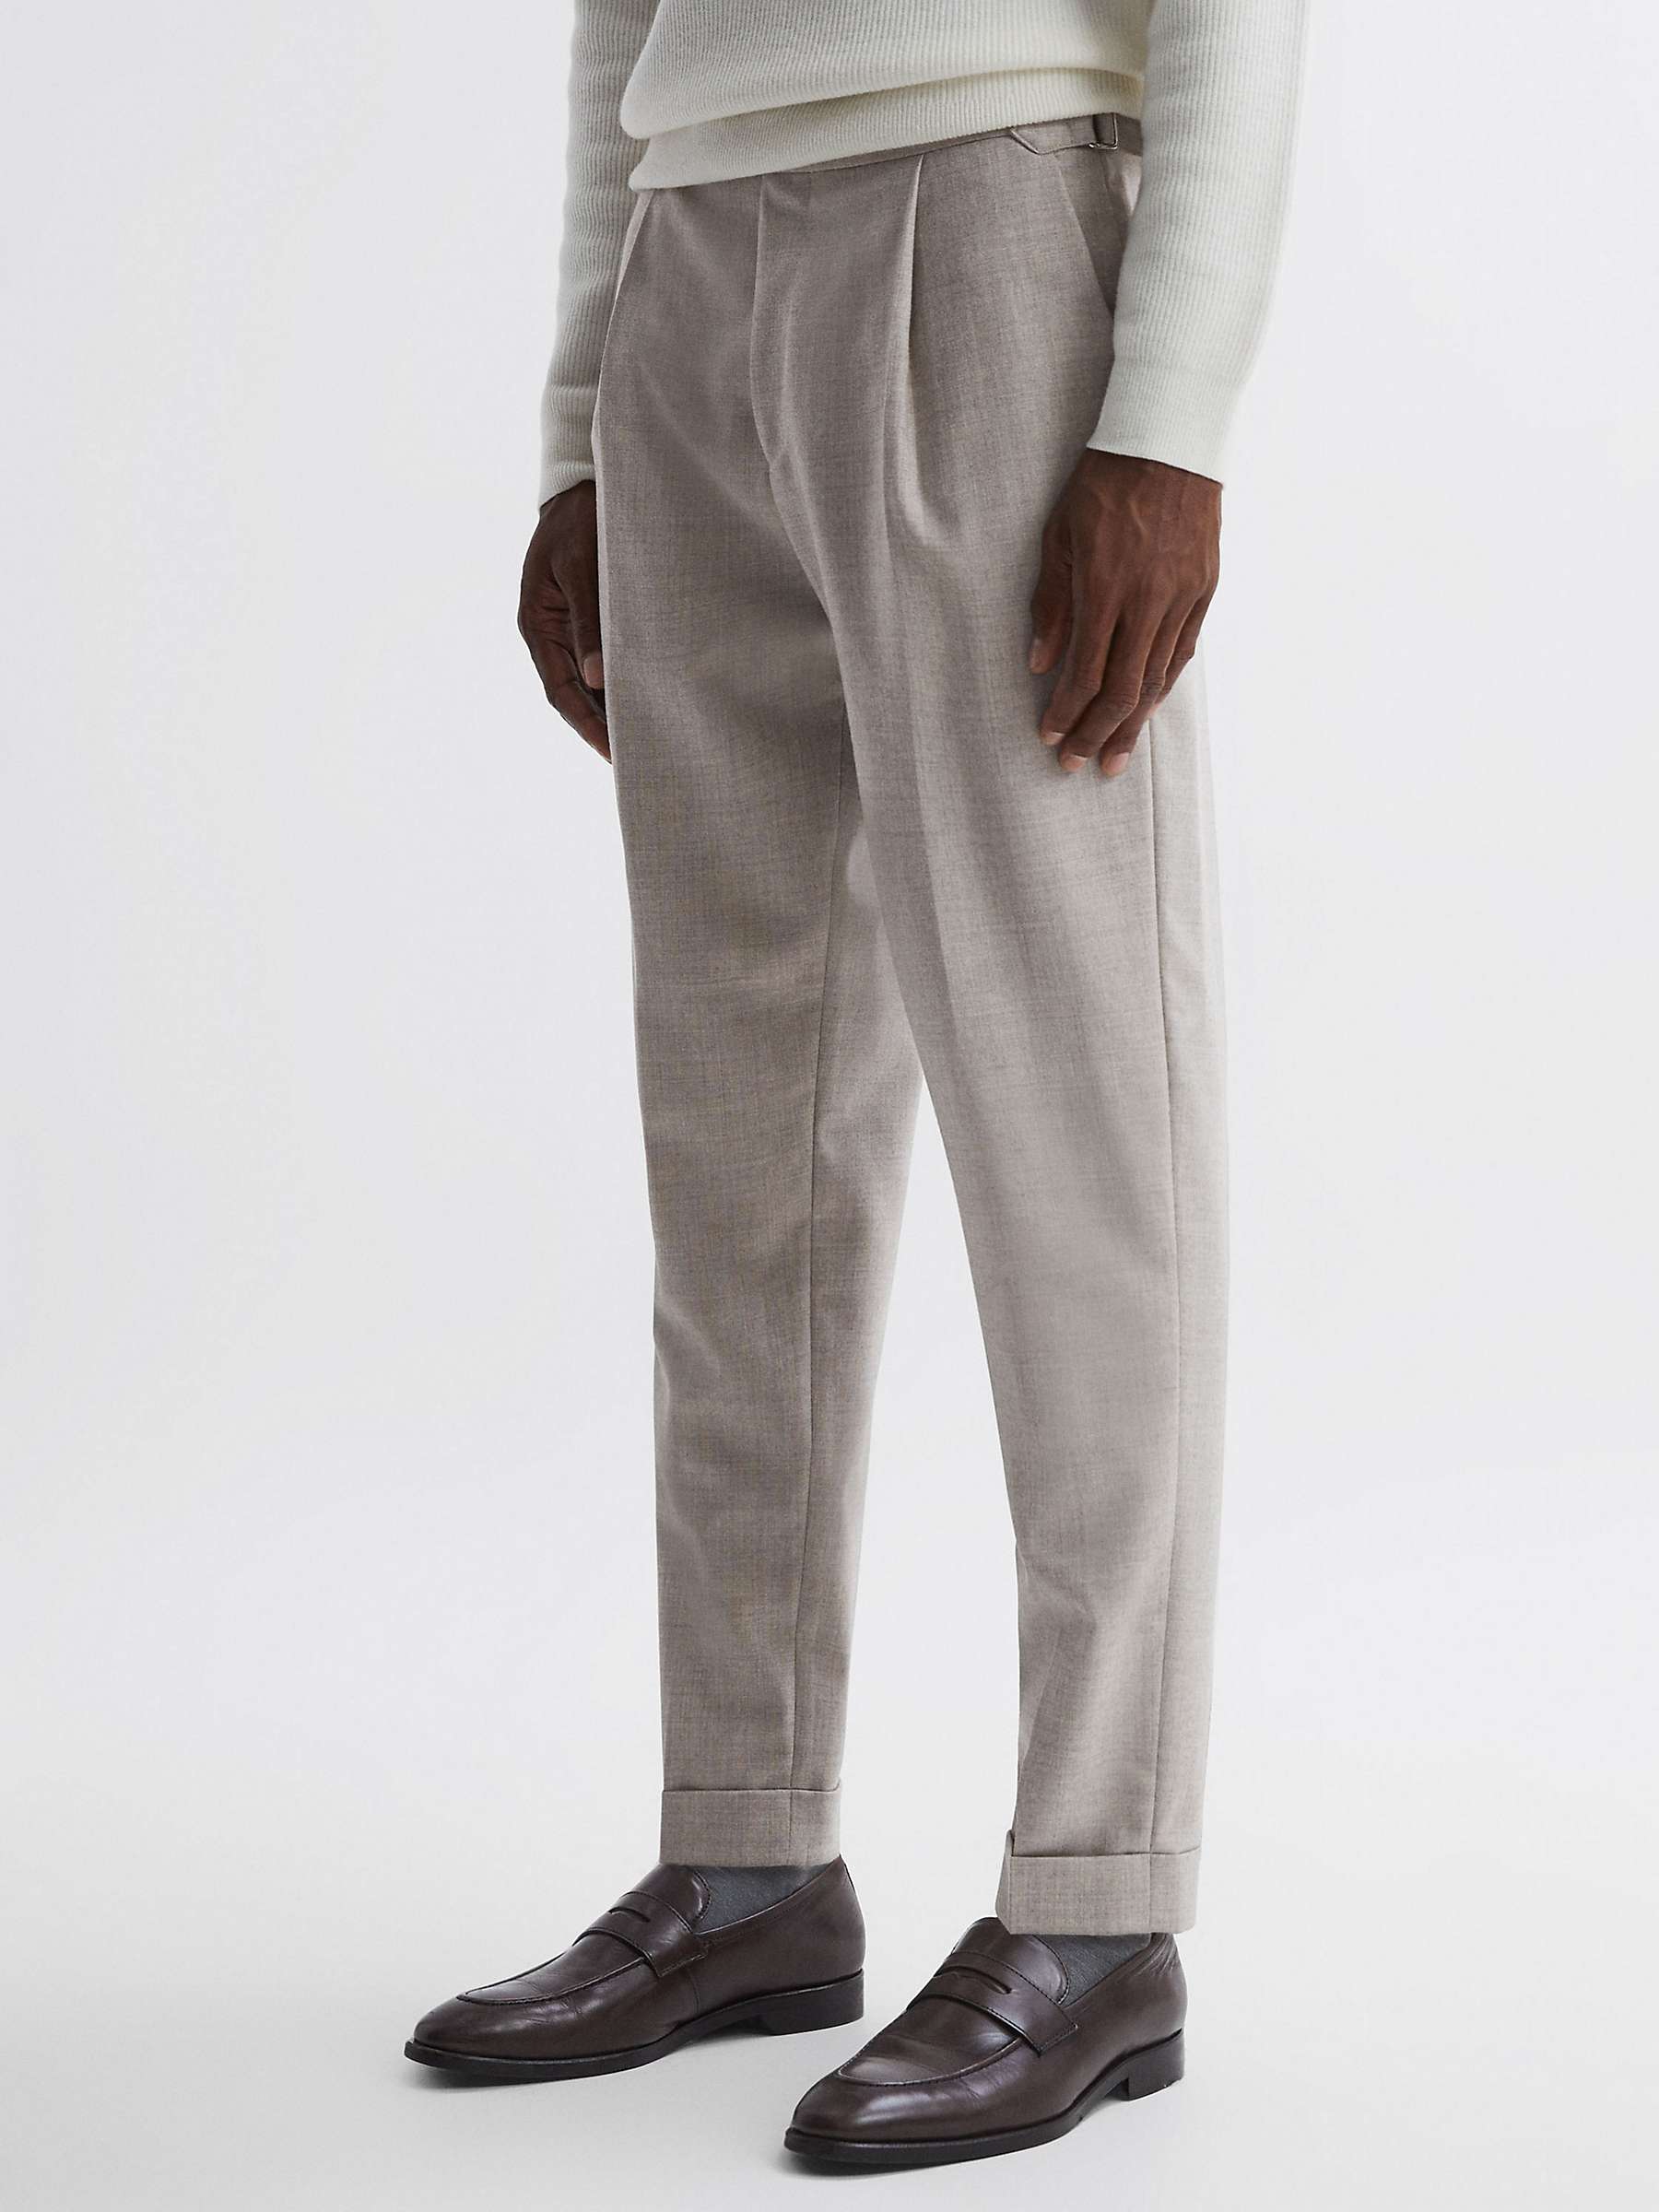 Reiss Beadnell Brushed Wool Trousers, Oatmeal at John Lewis & Partners